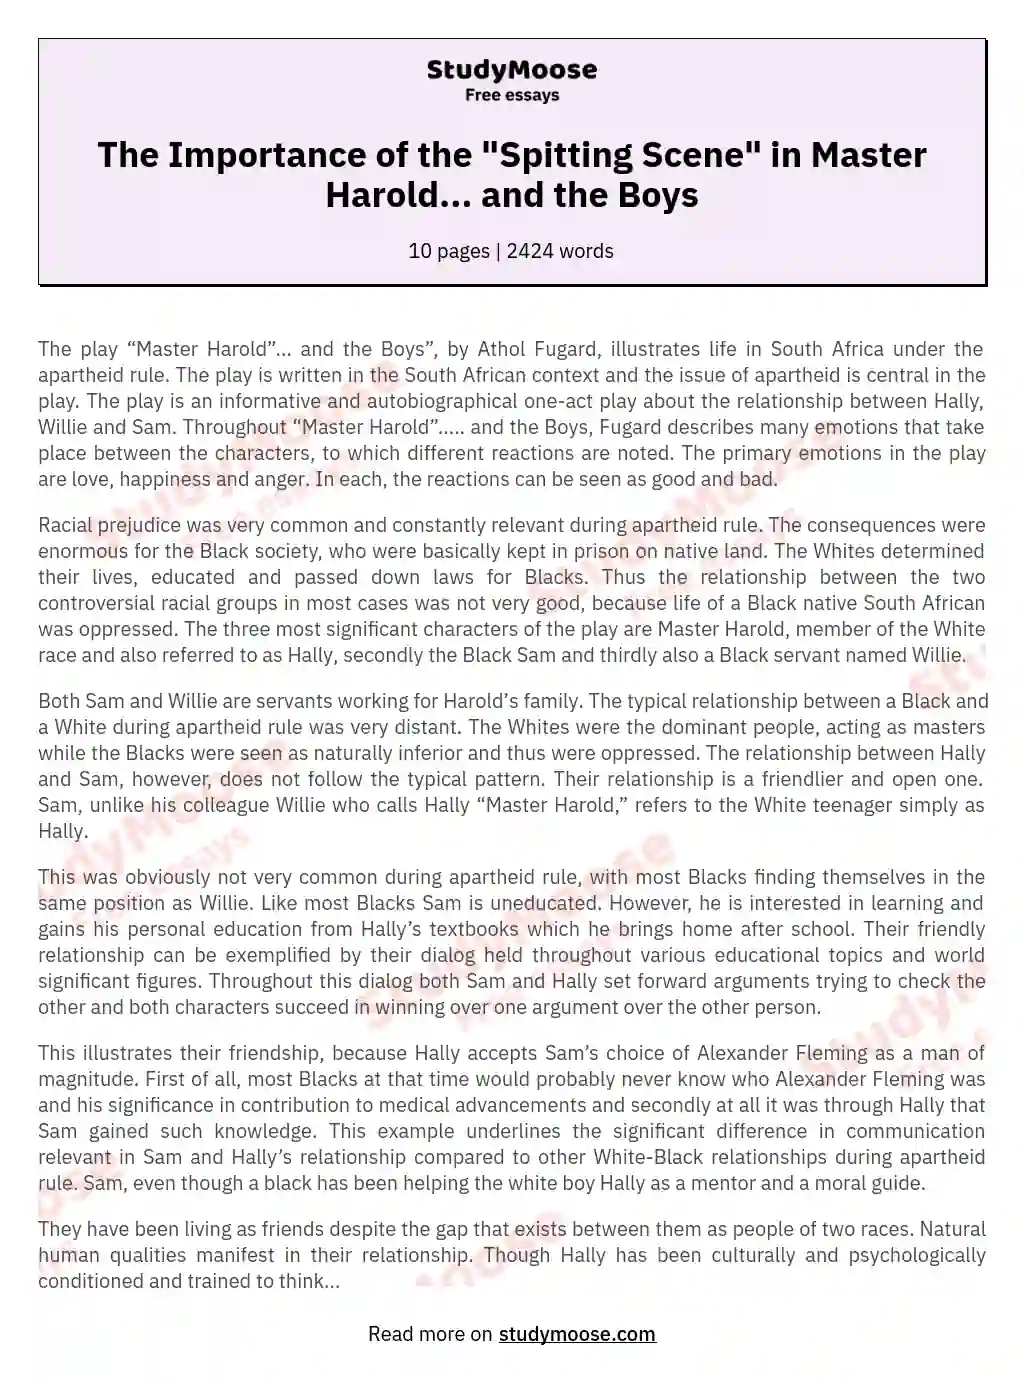 The Importance of the "Spitting Scene" in Master Harold... and the Boys